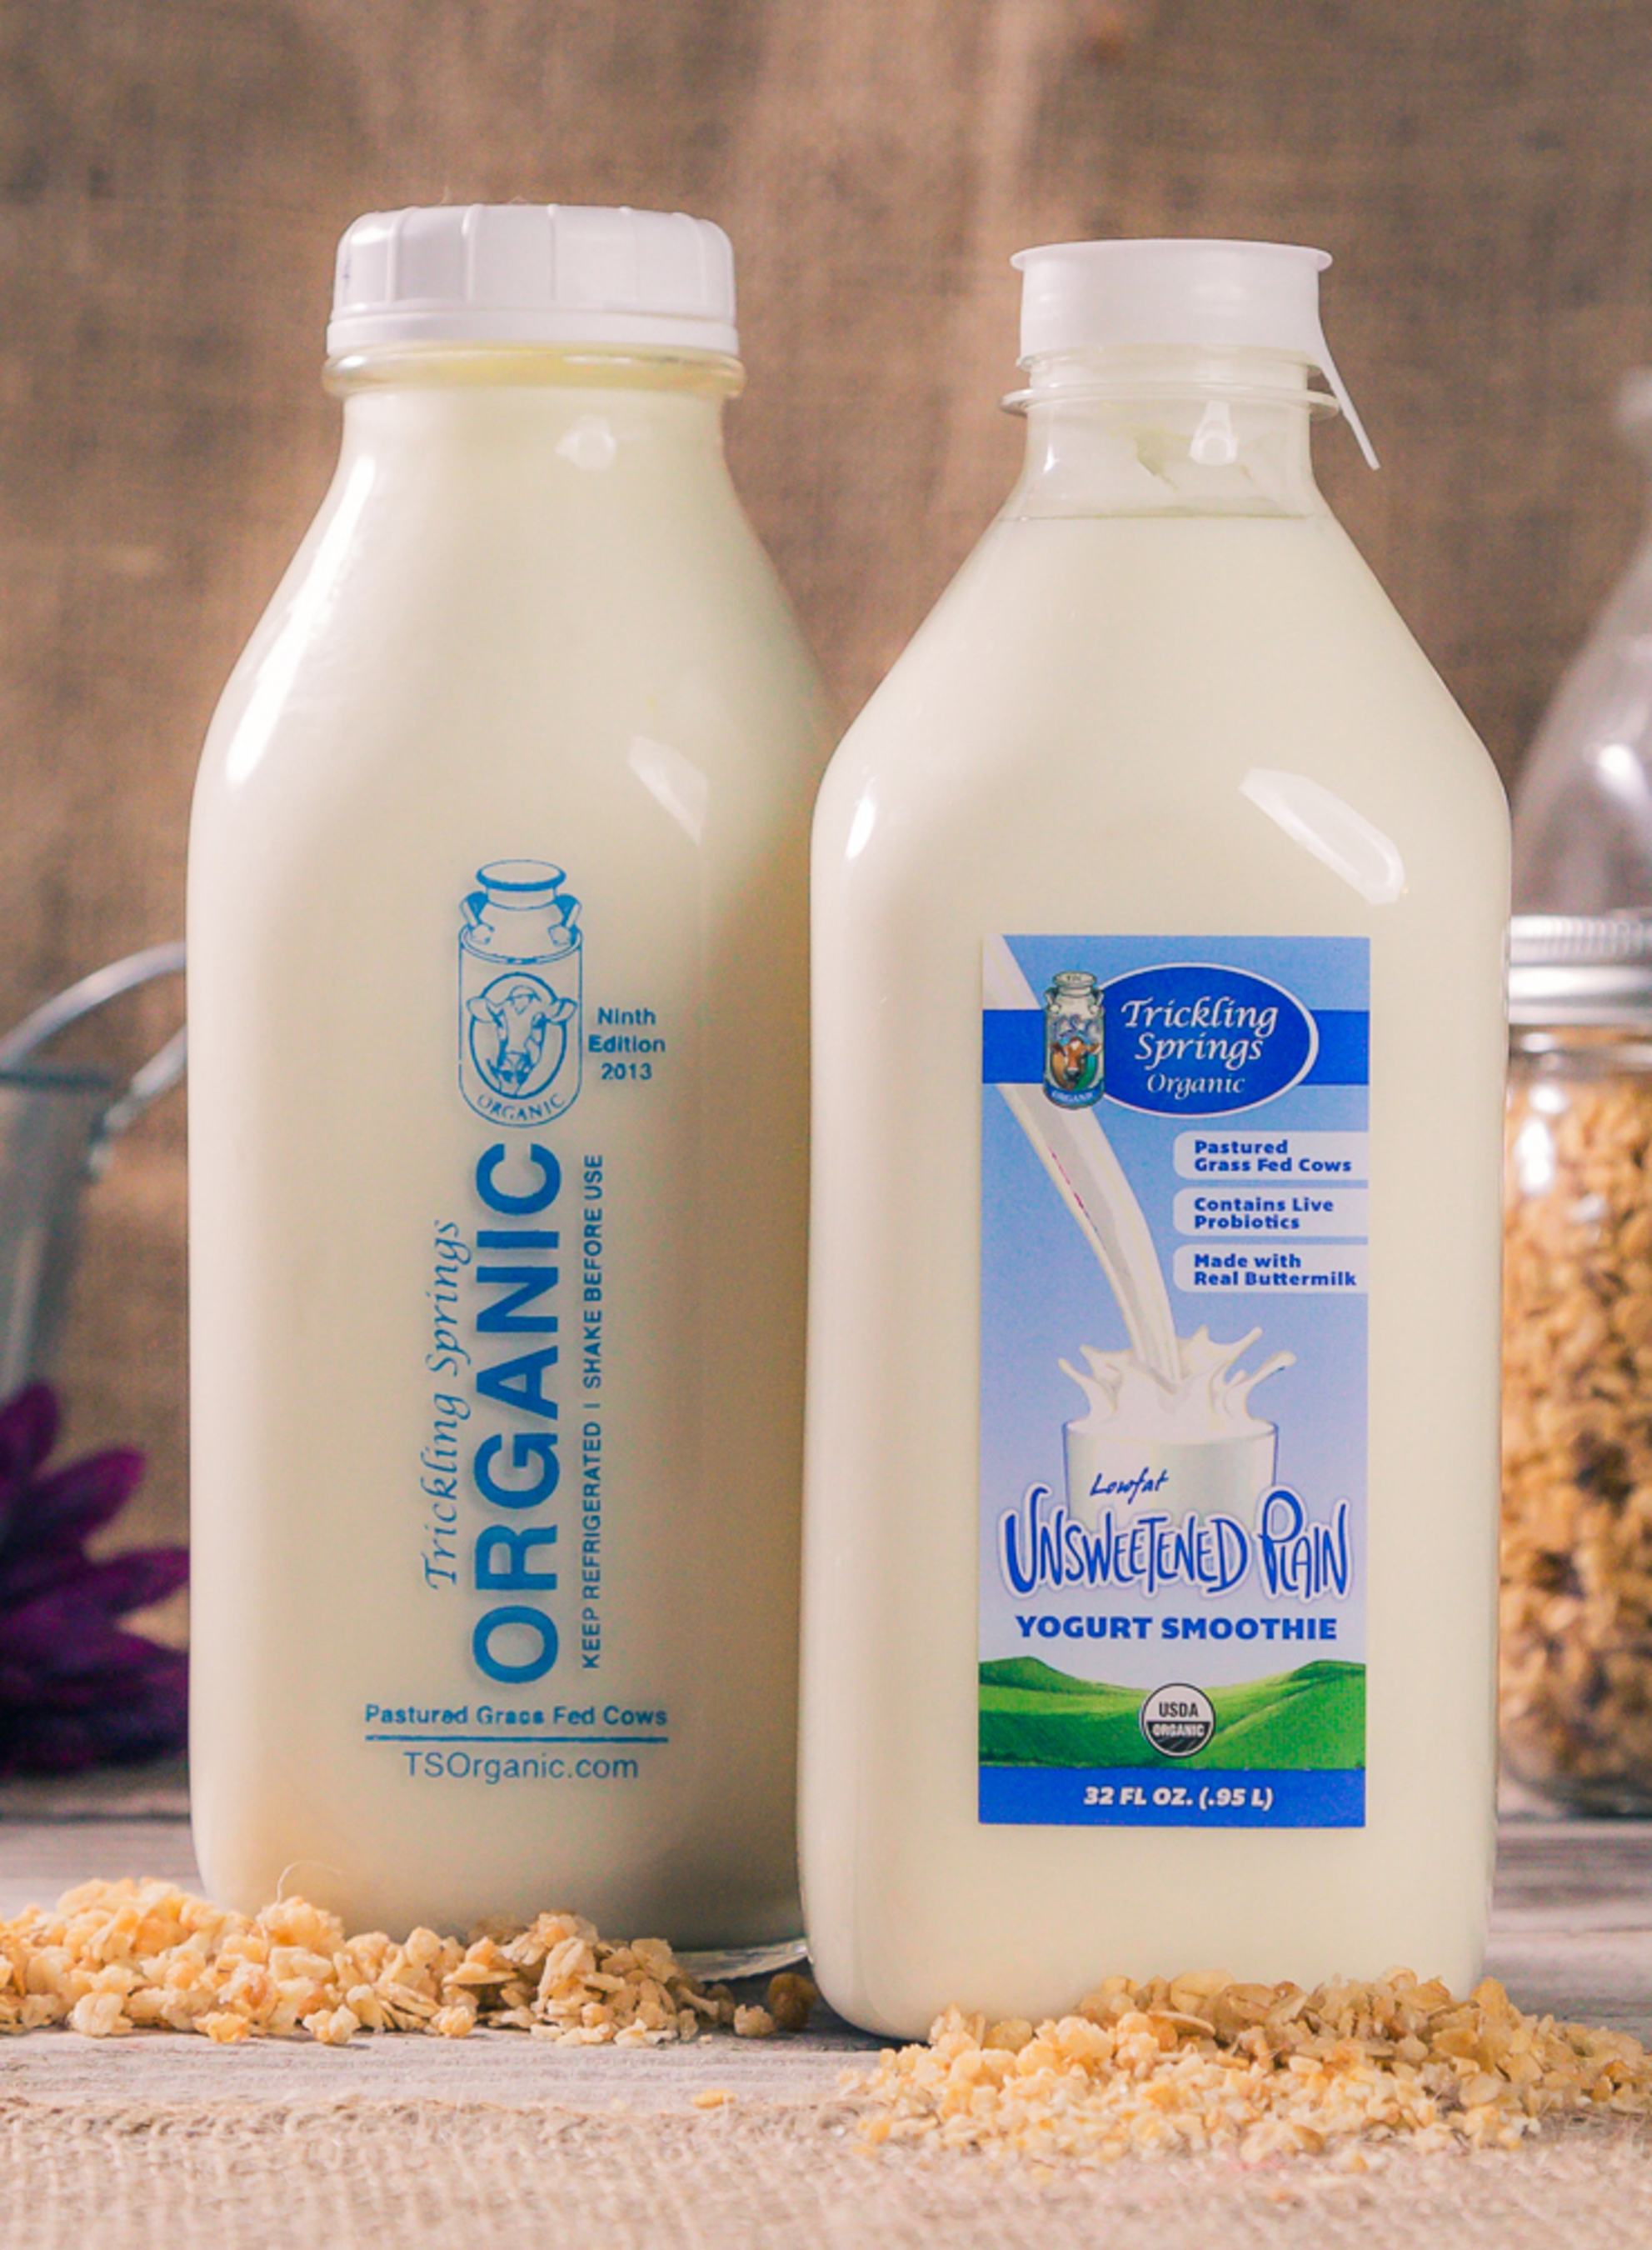 Trickling Springs Creamery’s drinkable yogurt, made in small batches from organic, grass-fed milk.  (PRNewsFoto/Trickling Springs Creamery)